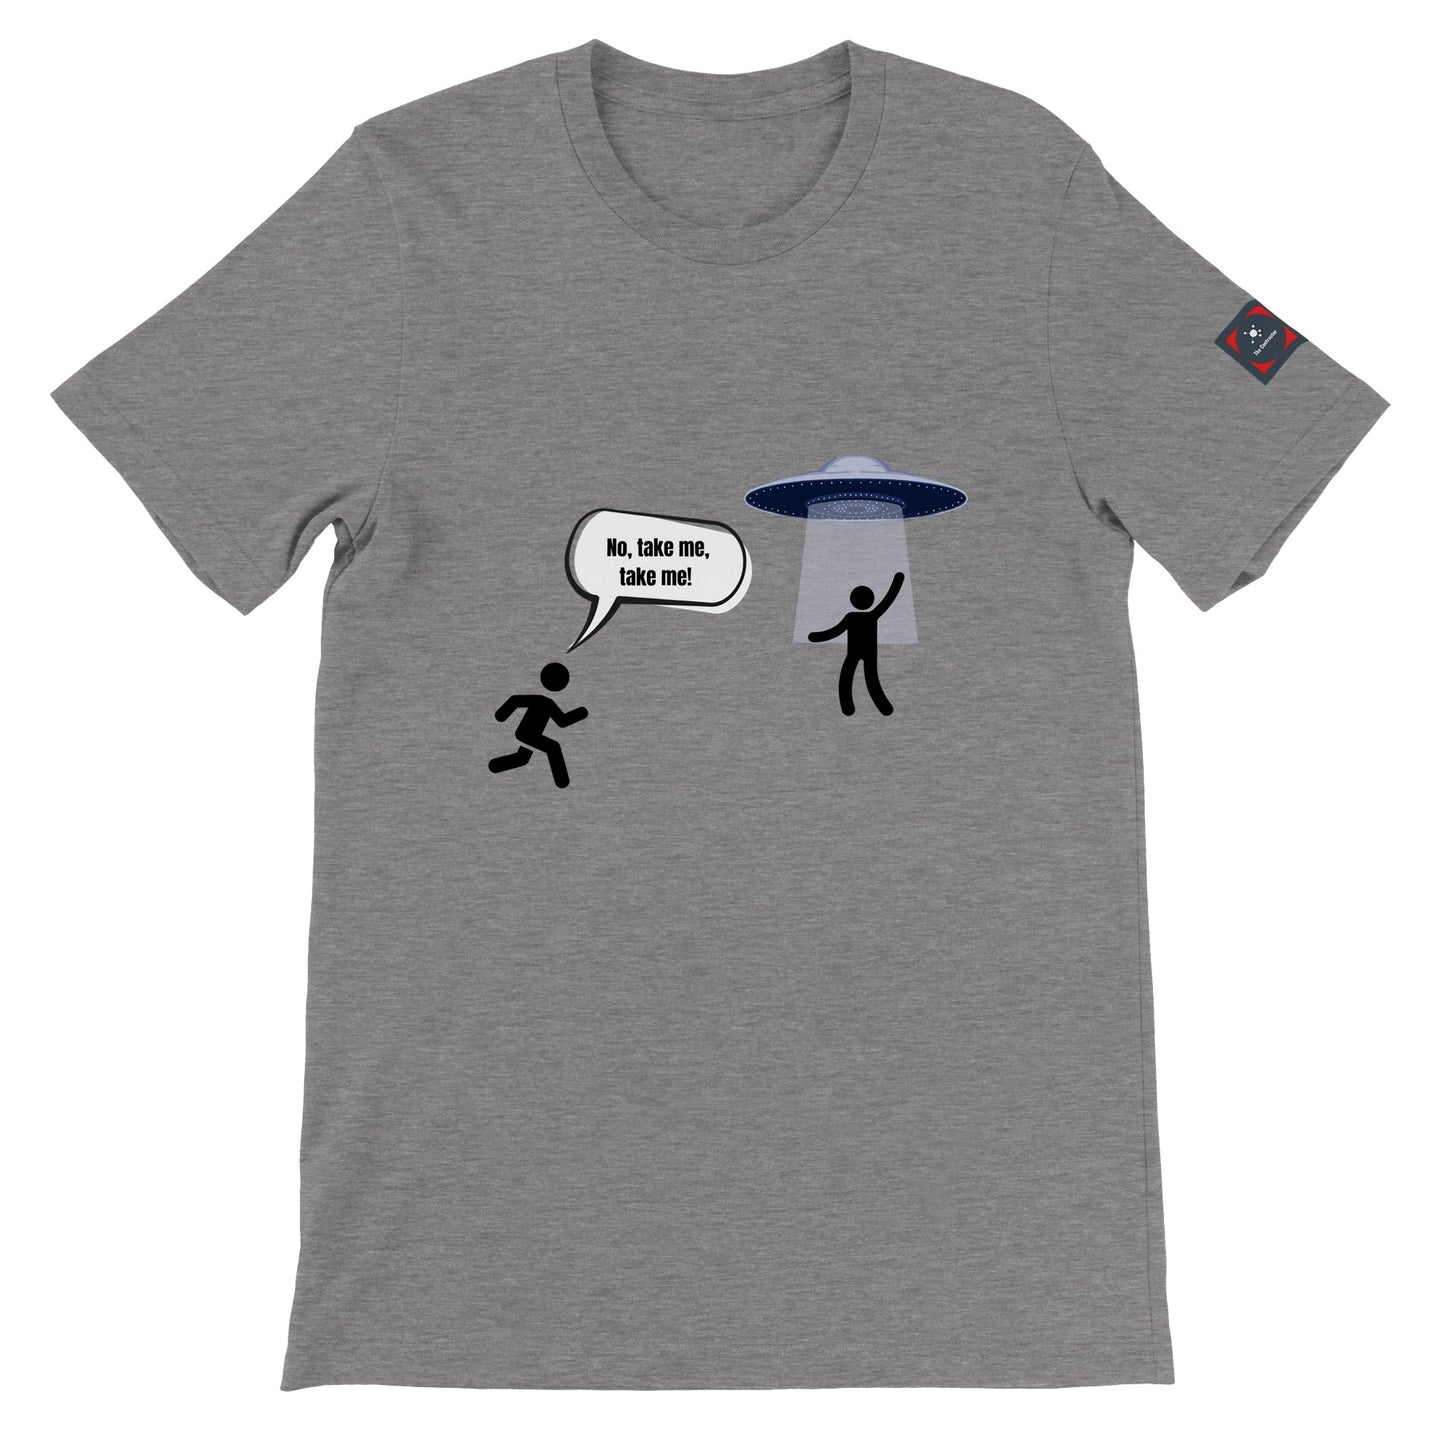 Enthusiastic Abduction T-Shirt